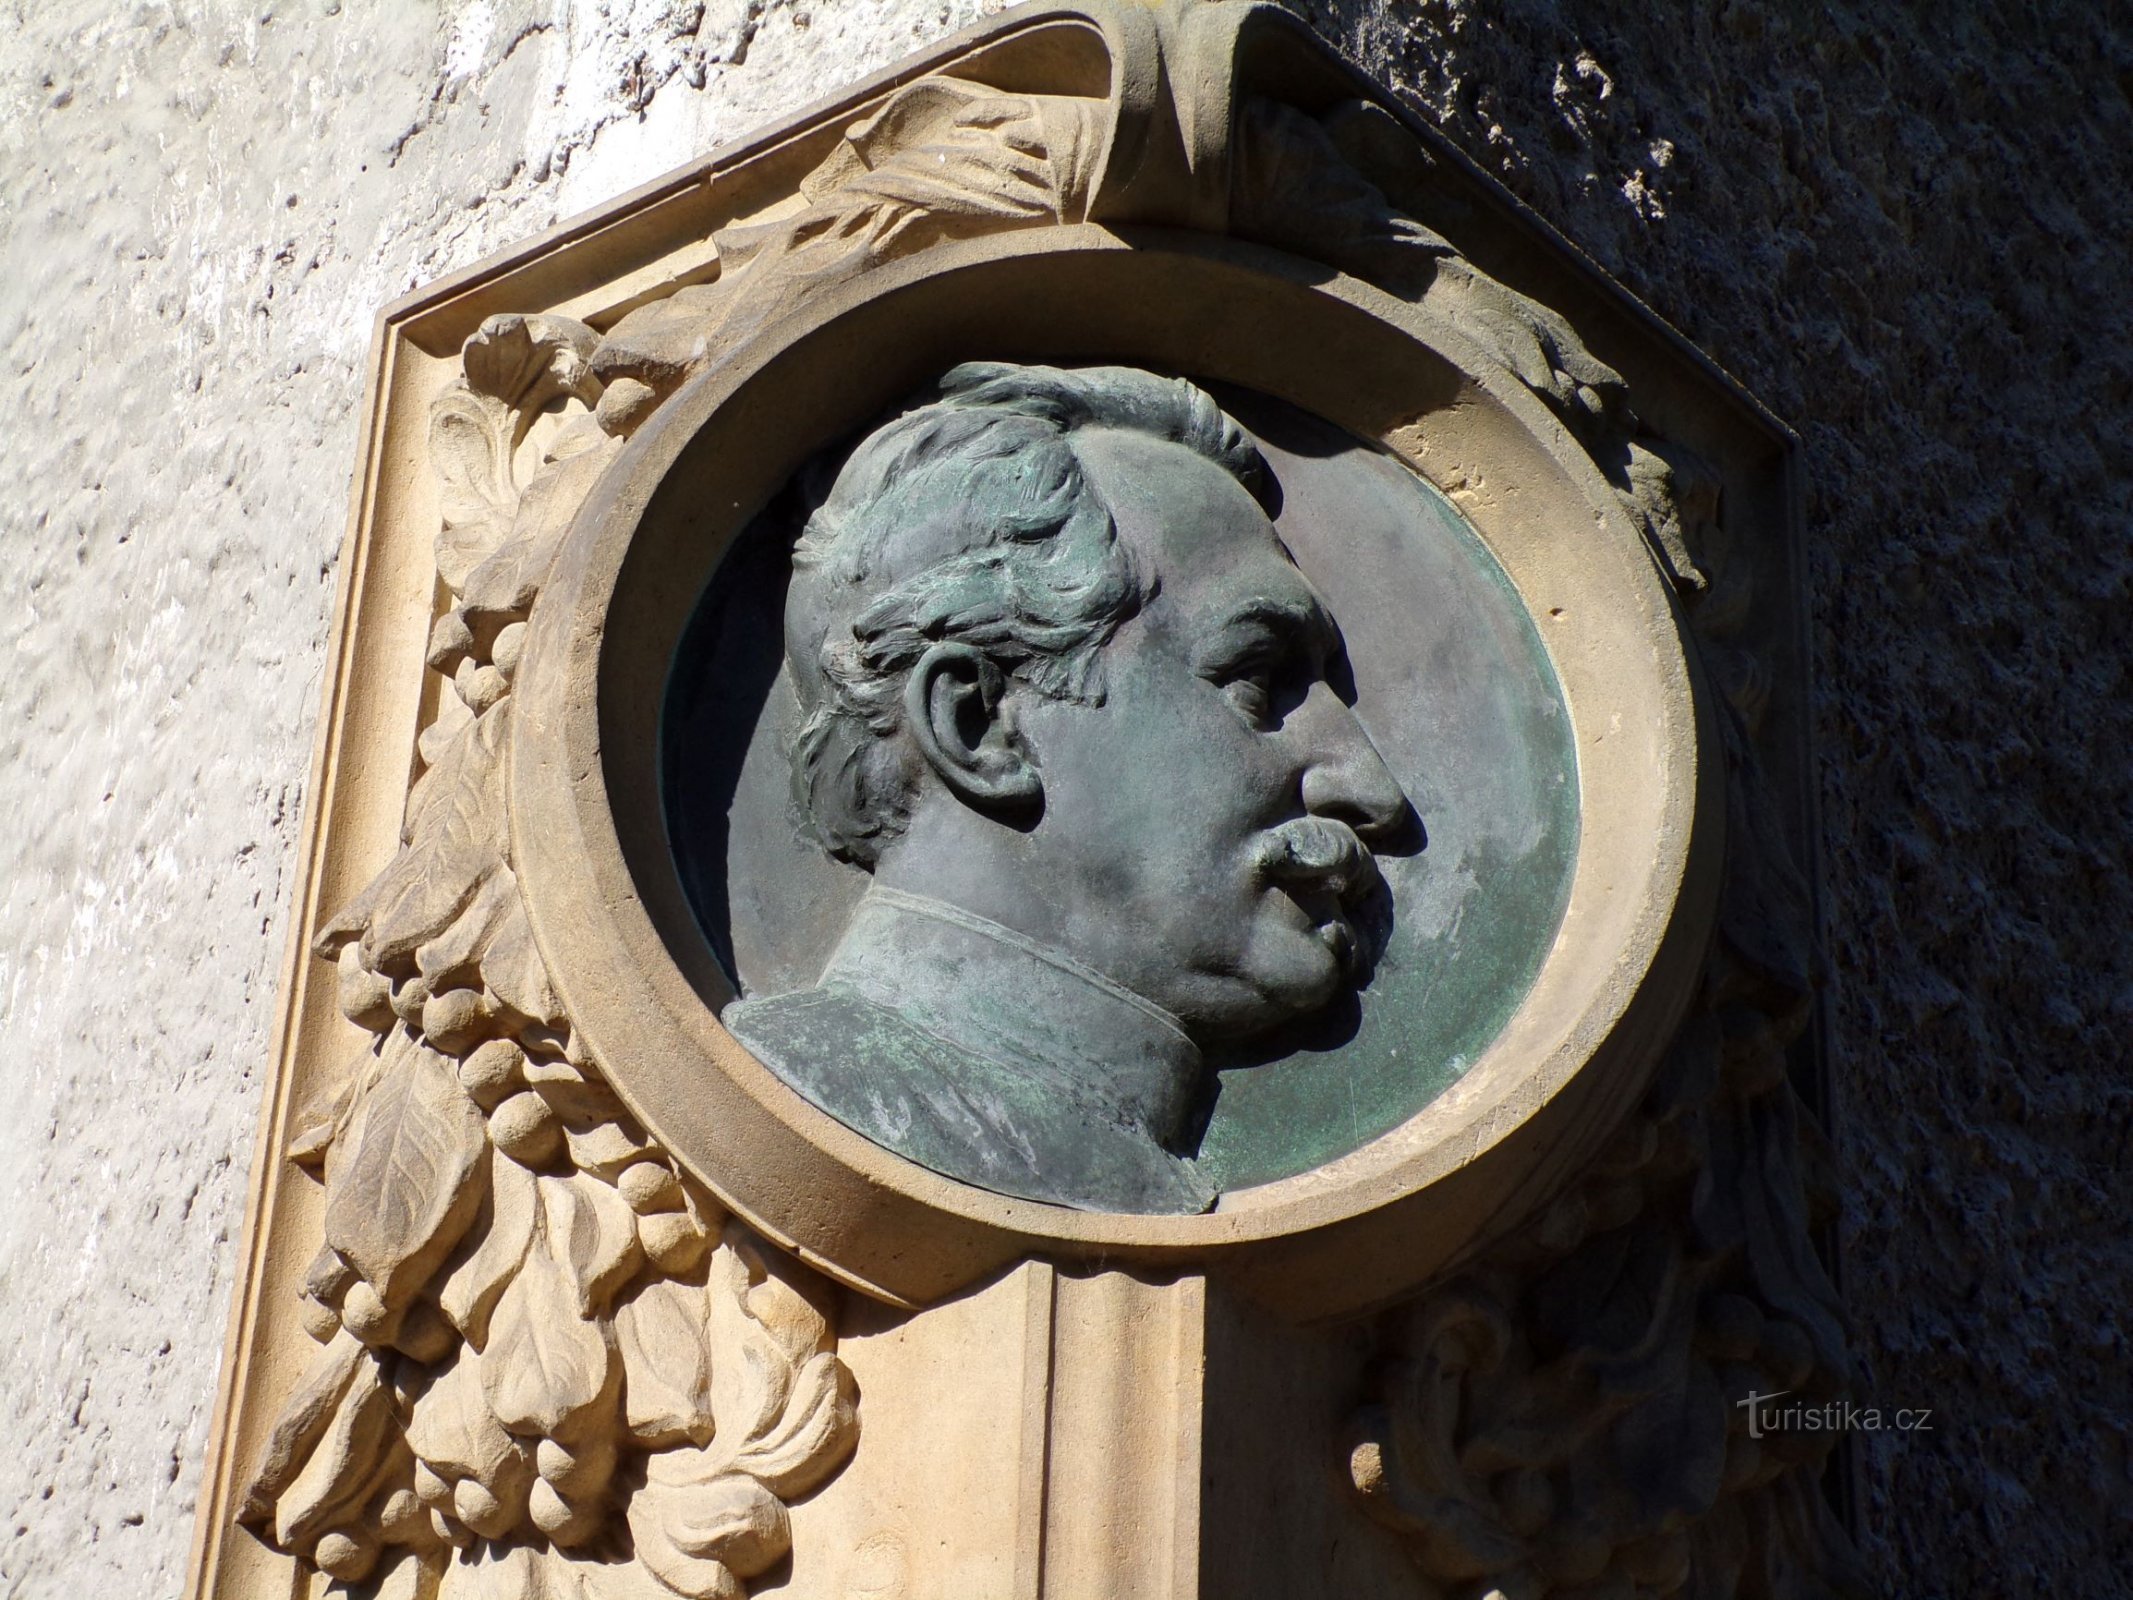 Detail of the relief of the memorial plaque JUDr. Jan Podlipny (Hněvčeves, 20.6.2021)